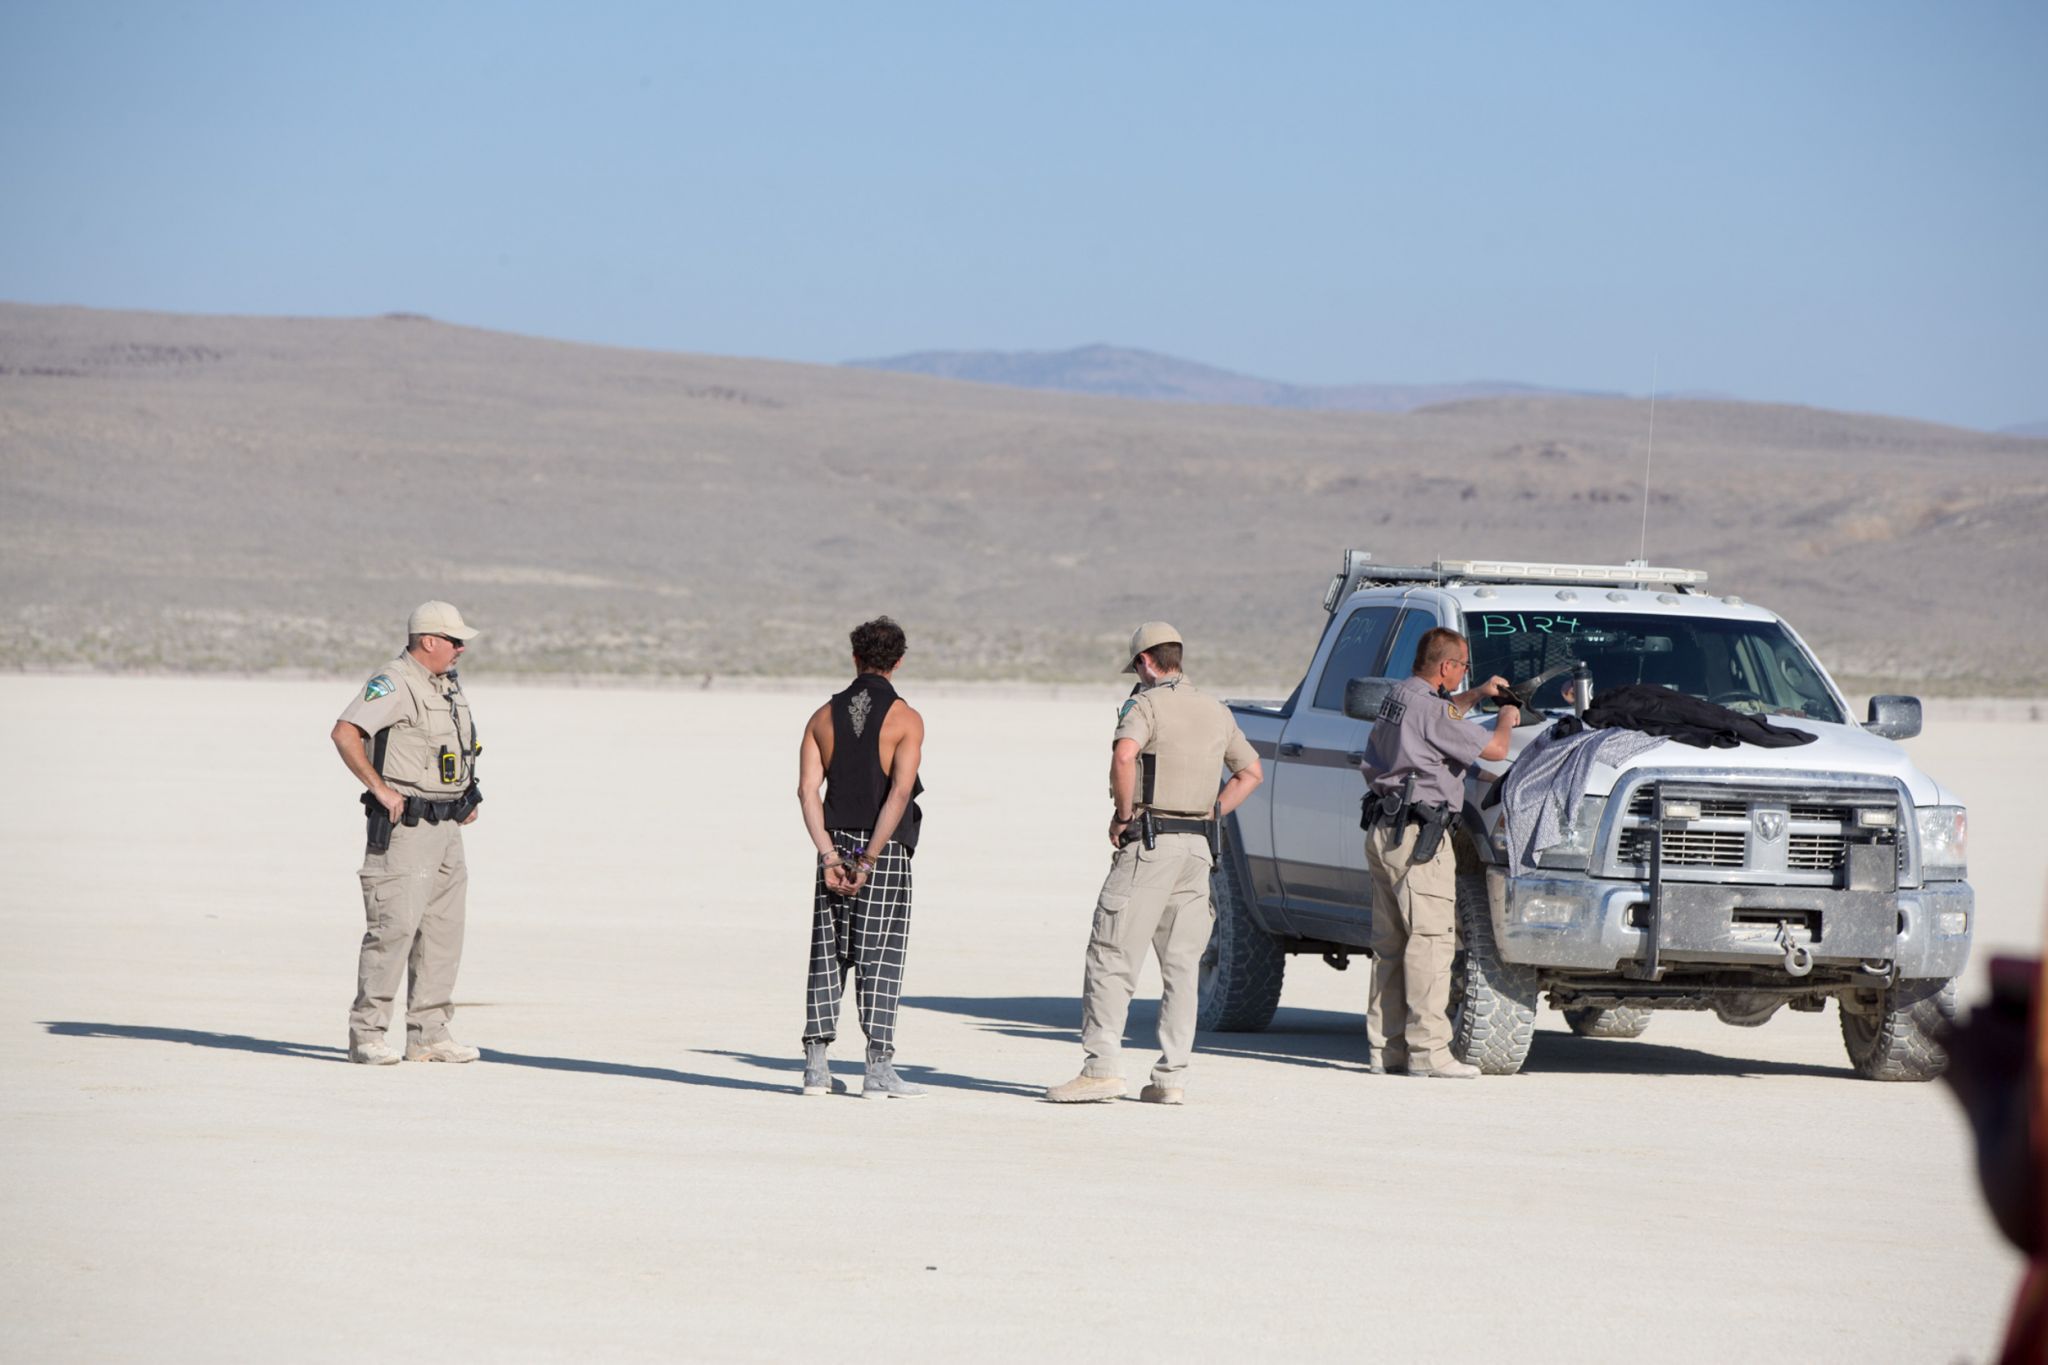 Police report from Burning Man 44 arrests, 1 death, armed car jacking